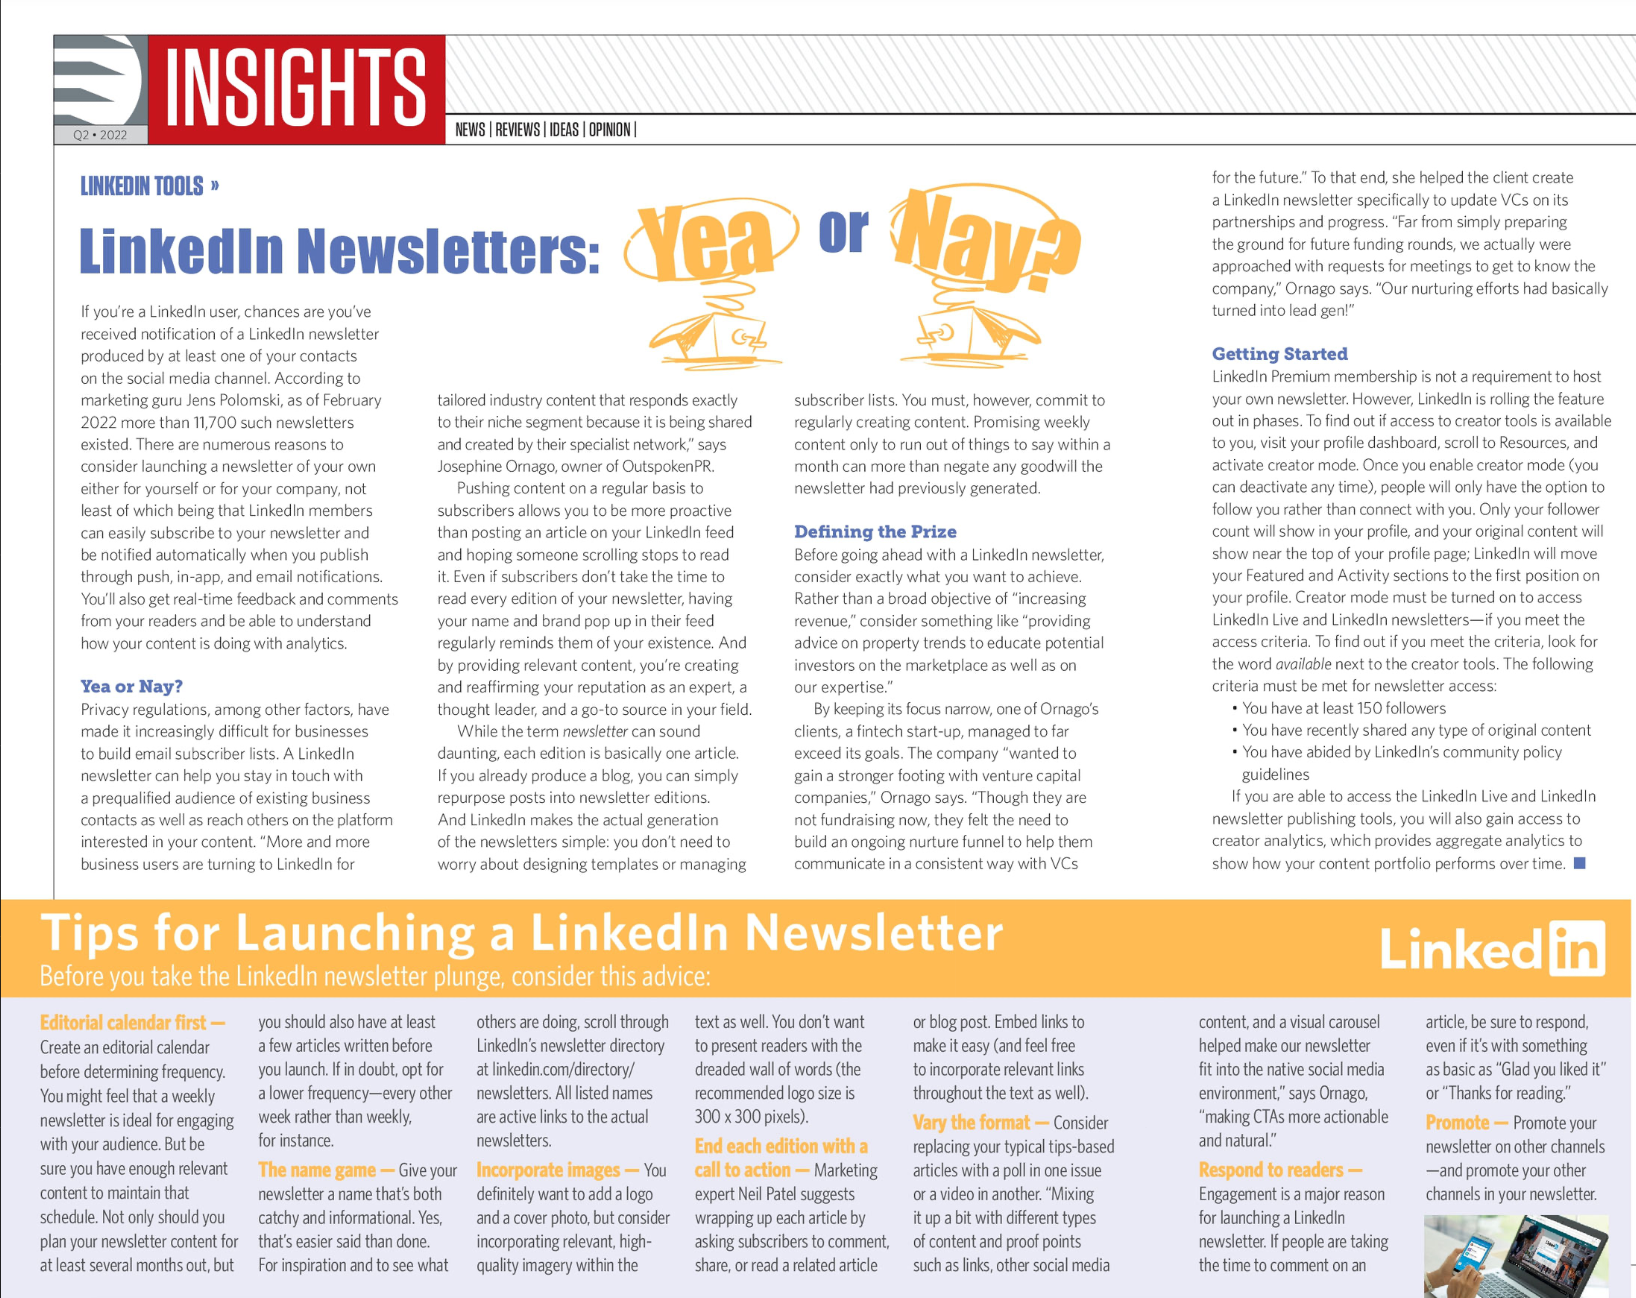 "LinkedIn Newsletters: Yea or Nay?" (The CMO Team)